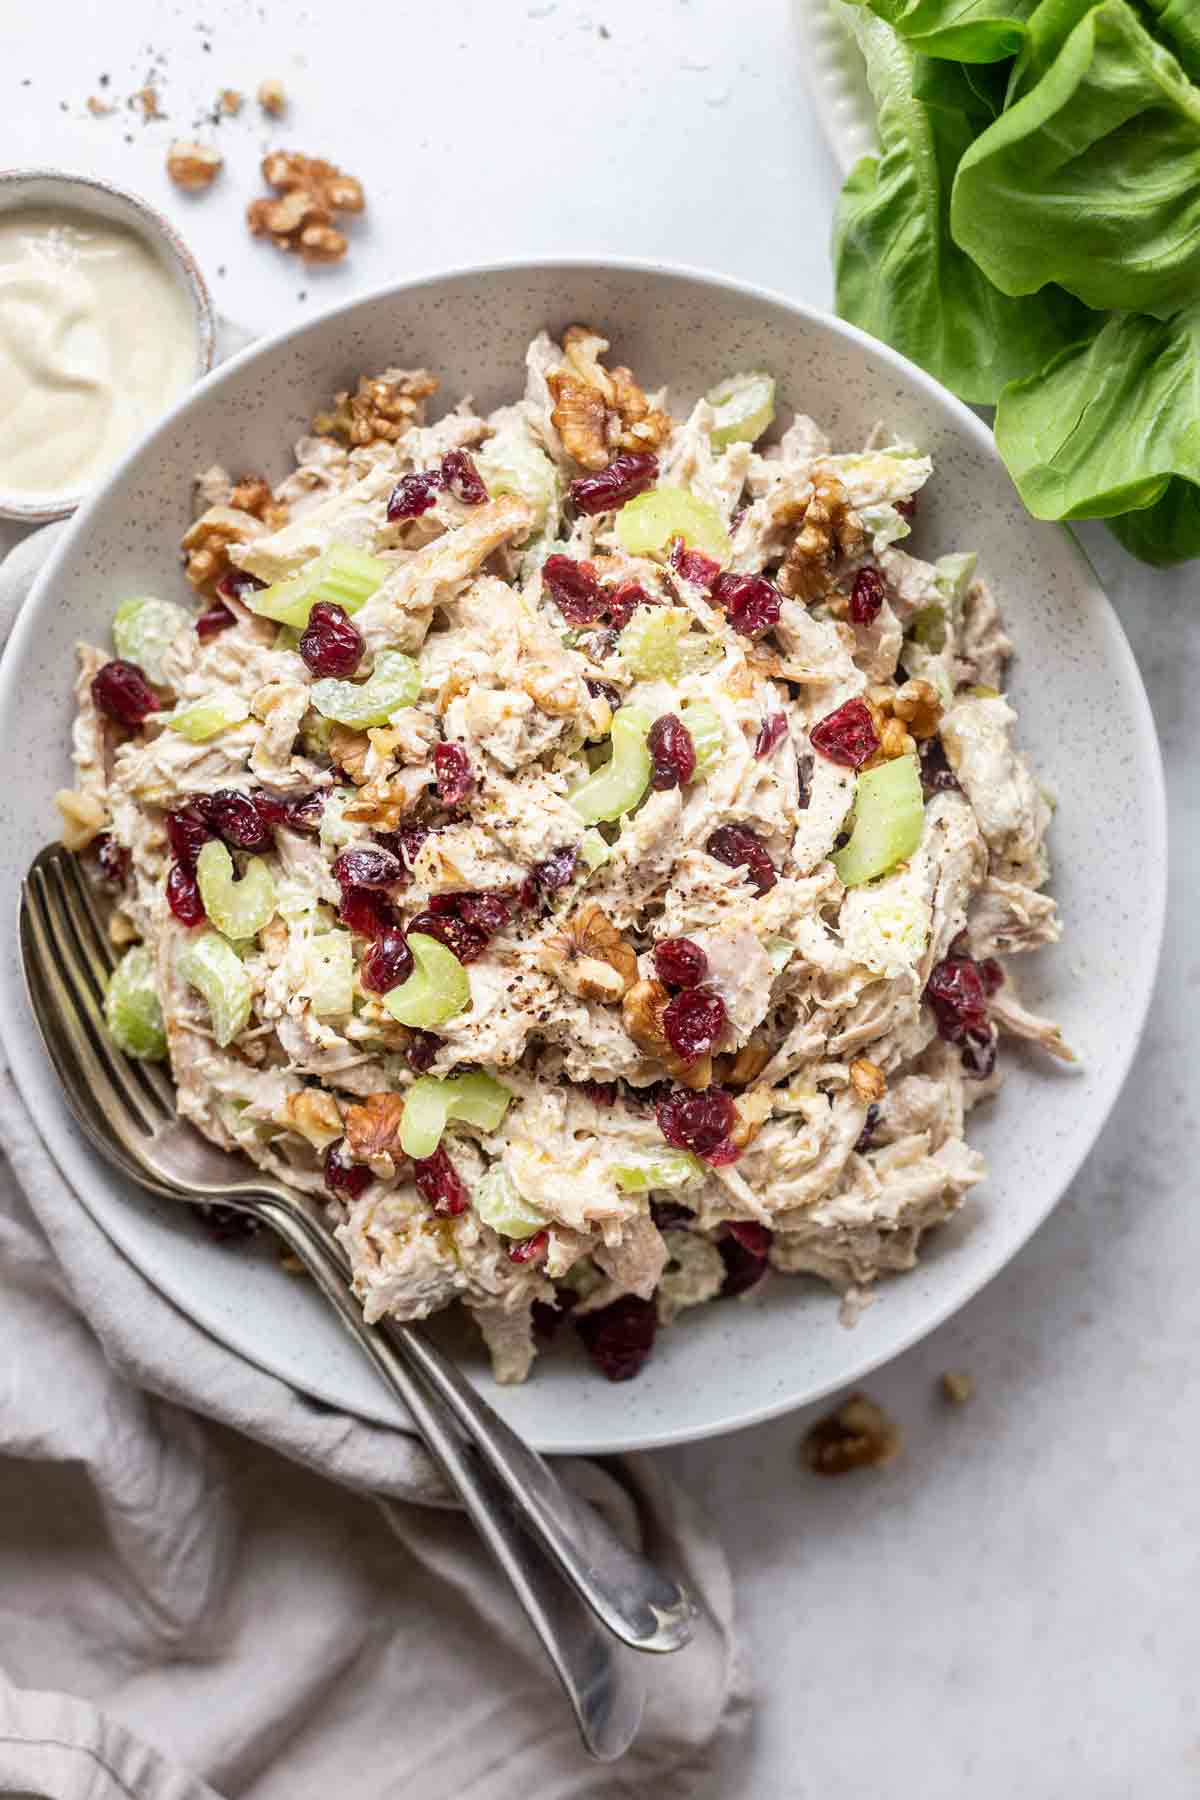 Rotisserie Chicken Salad with Cranberries and Walnuts